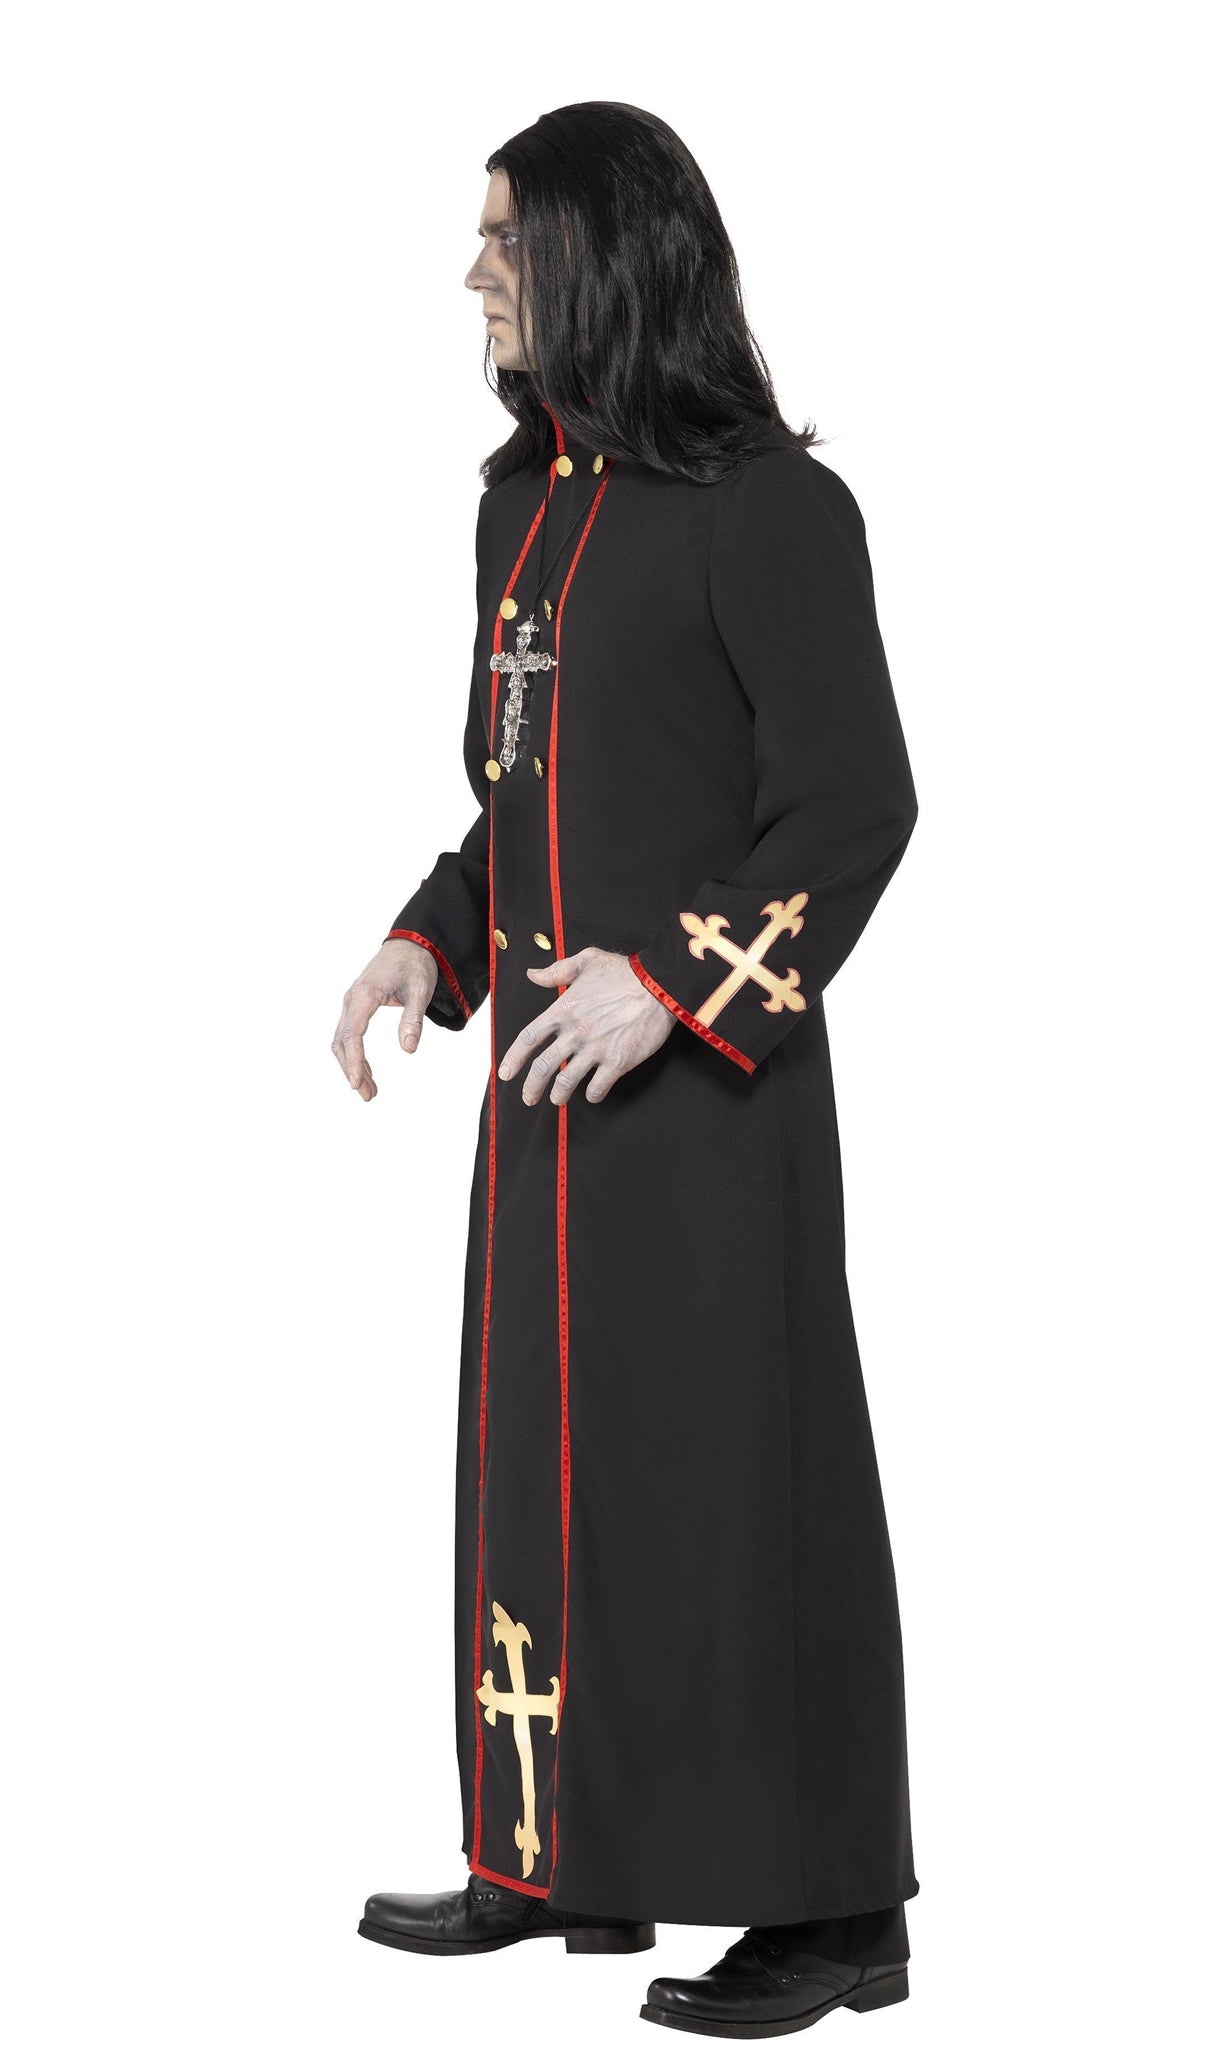 Side of men's black priest robe with red stripes and gold cross symbols